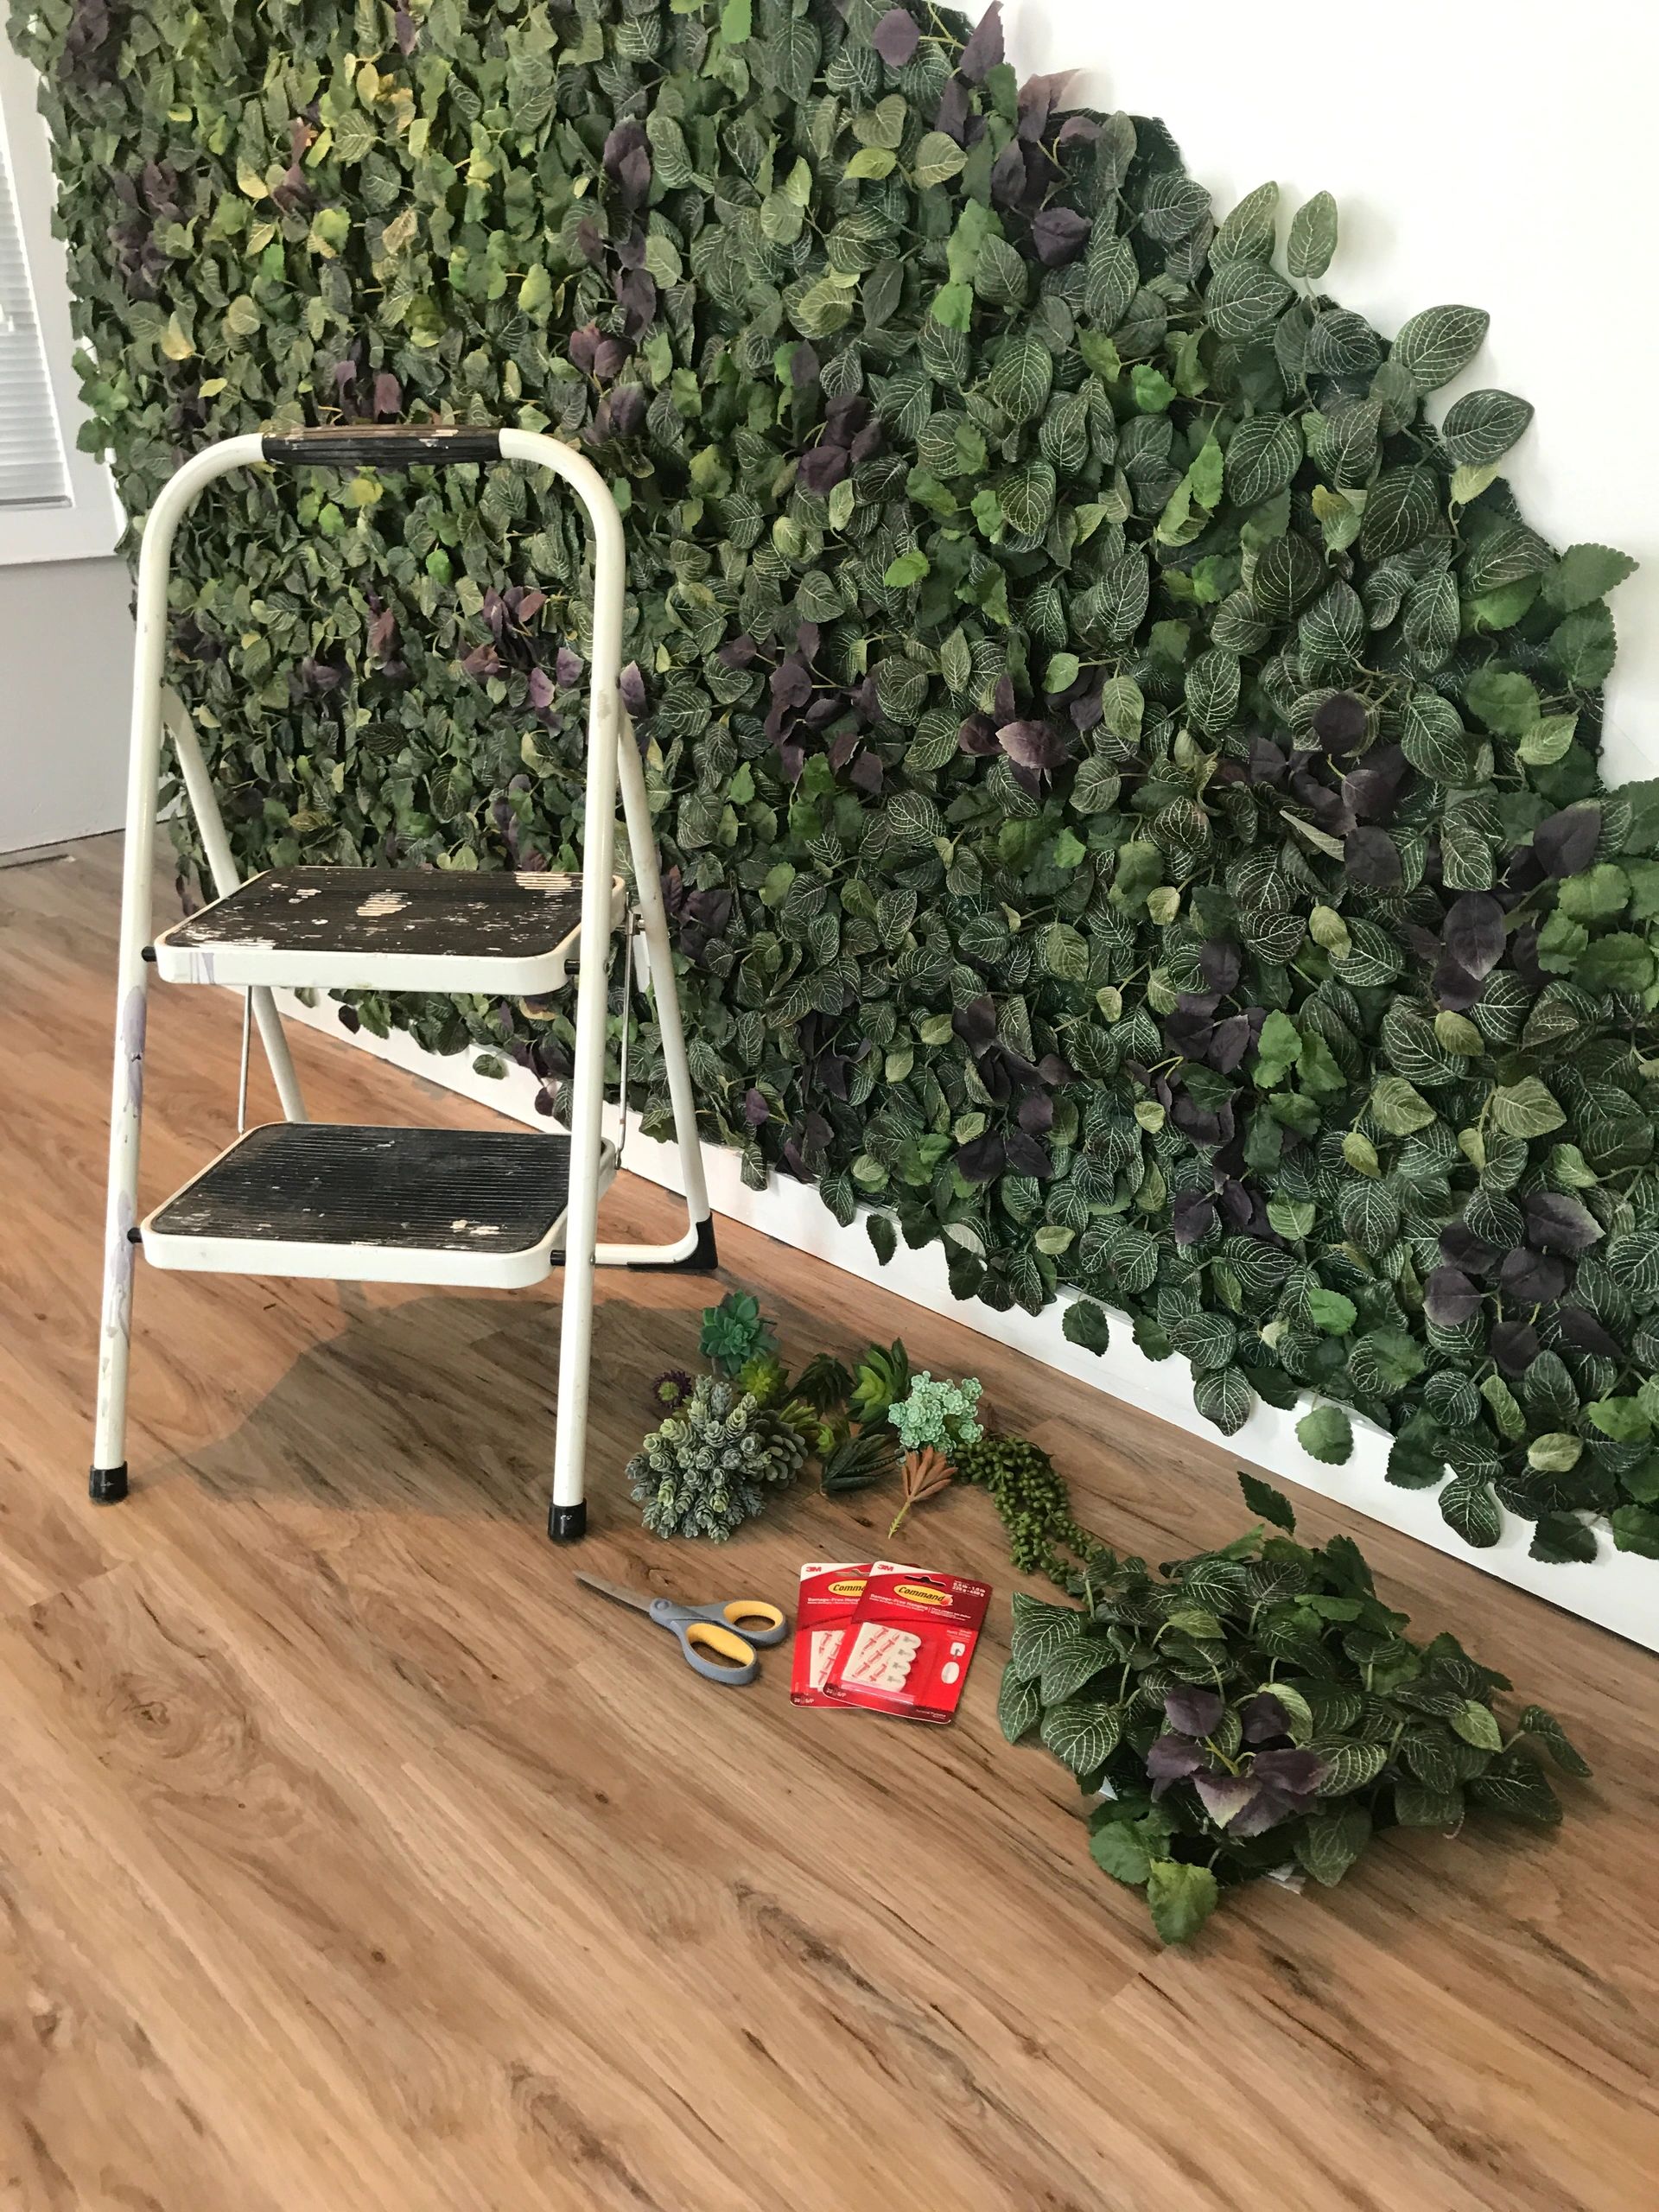 How to make an indoor faux living wall